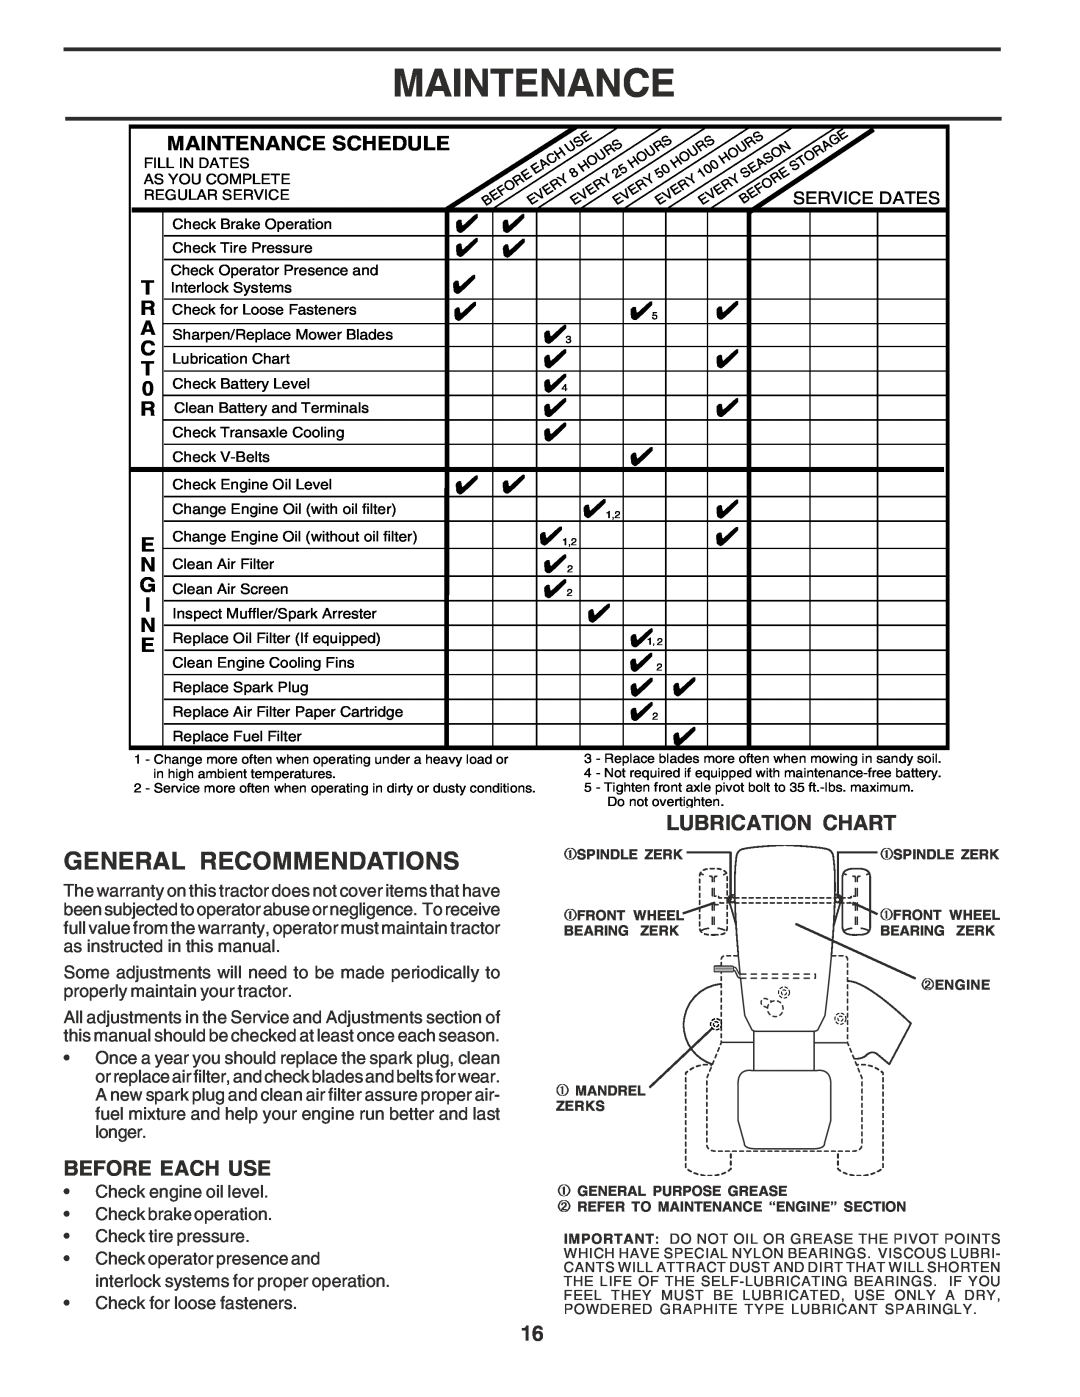 Poulan PR25PH48STC owner manual General Recommendations, Lubrication Chart, Before Each Use, Maintenance Schedule 